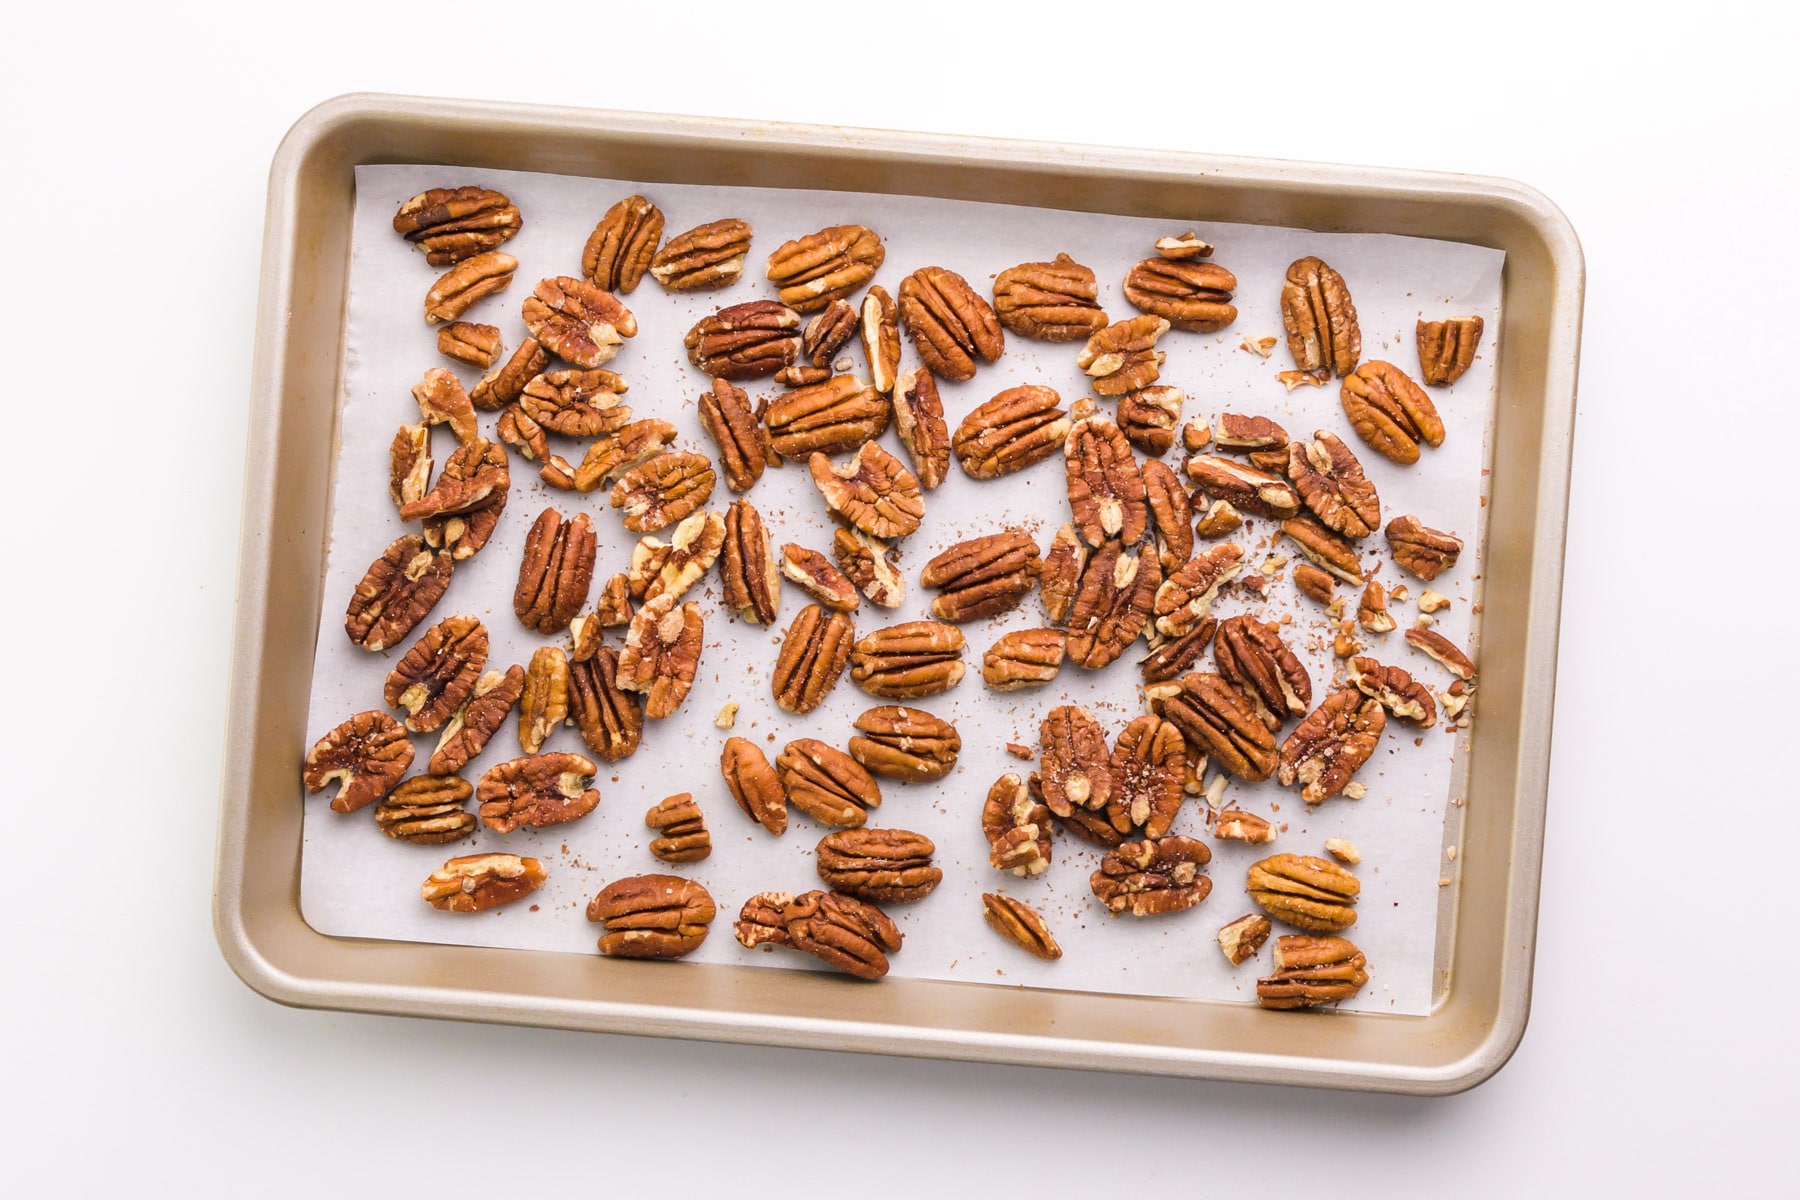 Pecans have been toasted on a baking sheet.